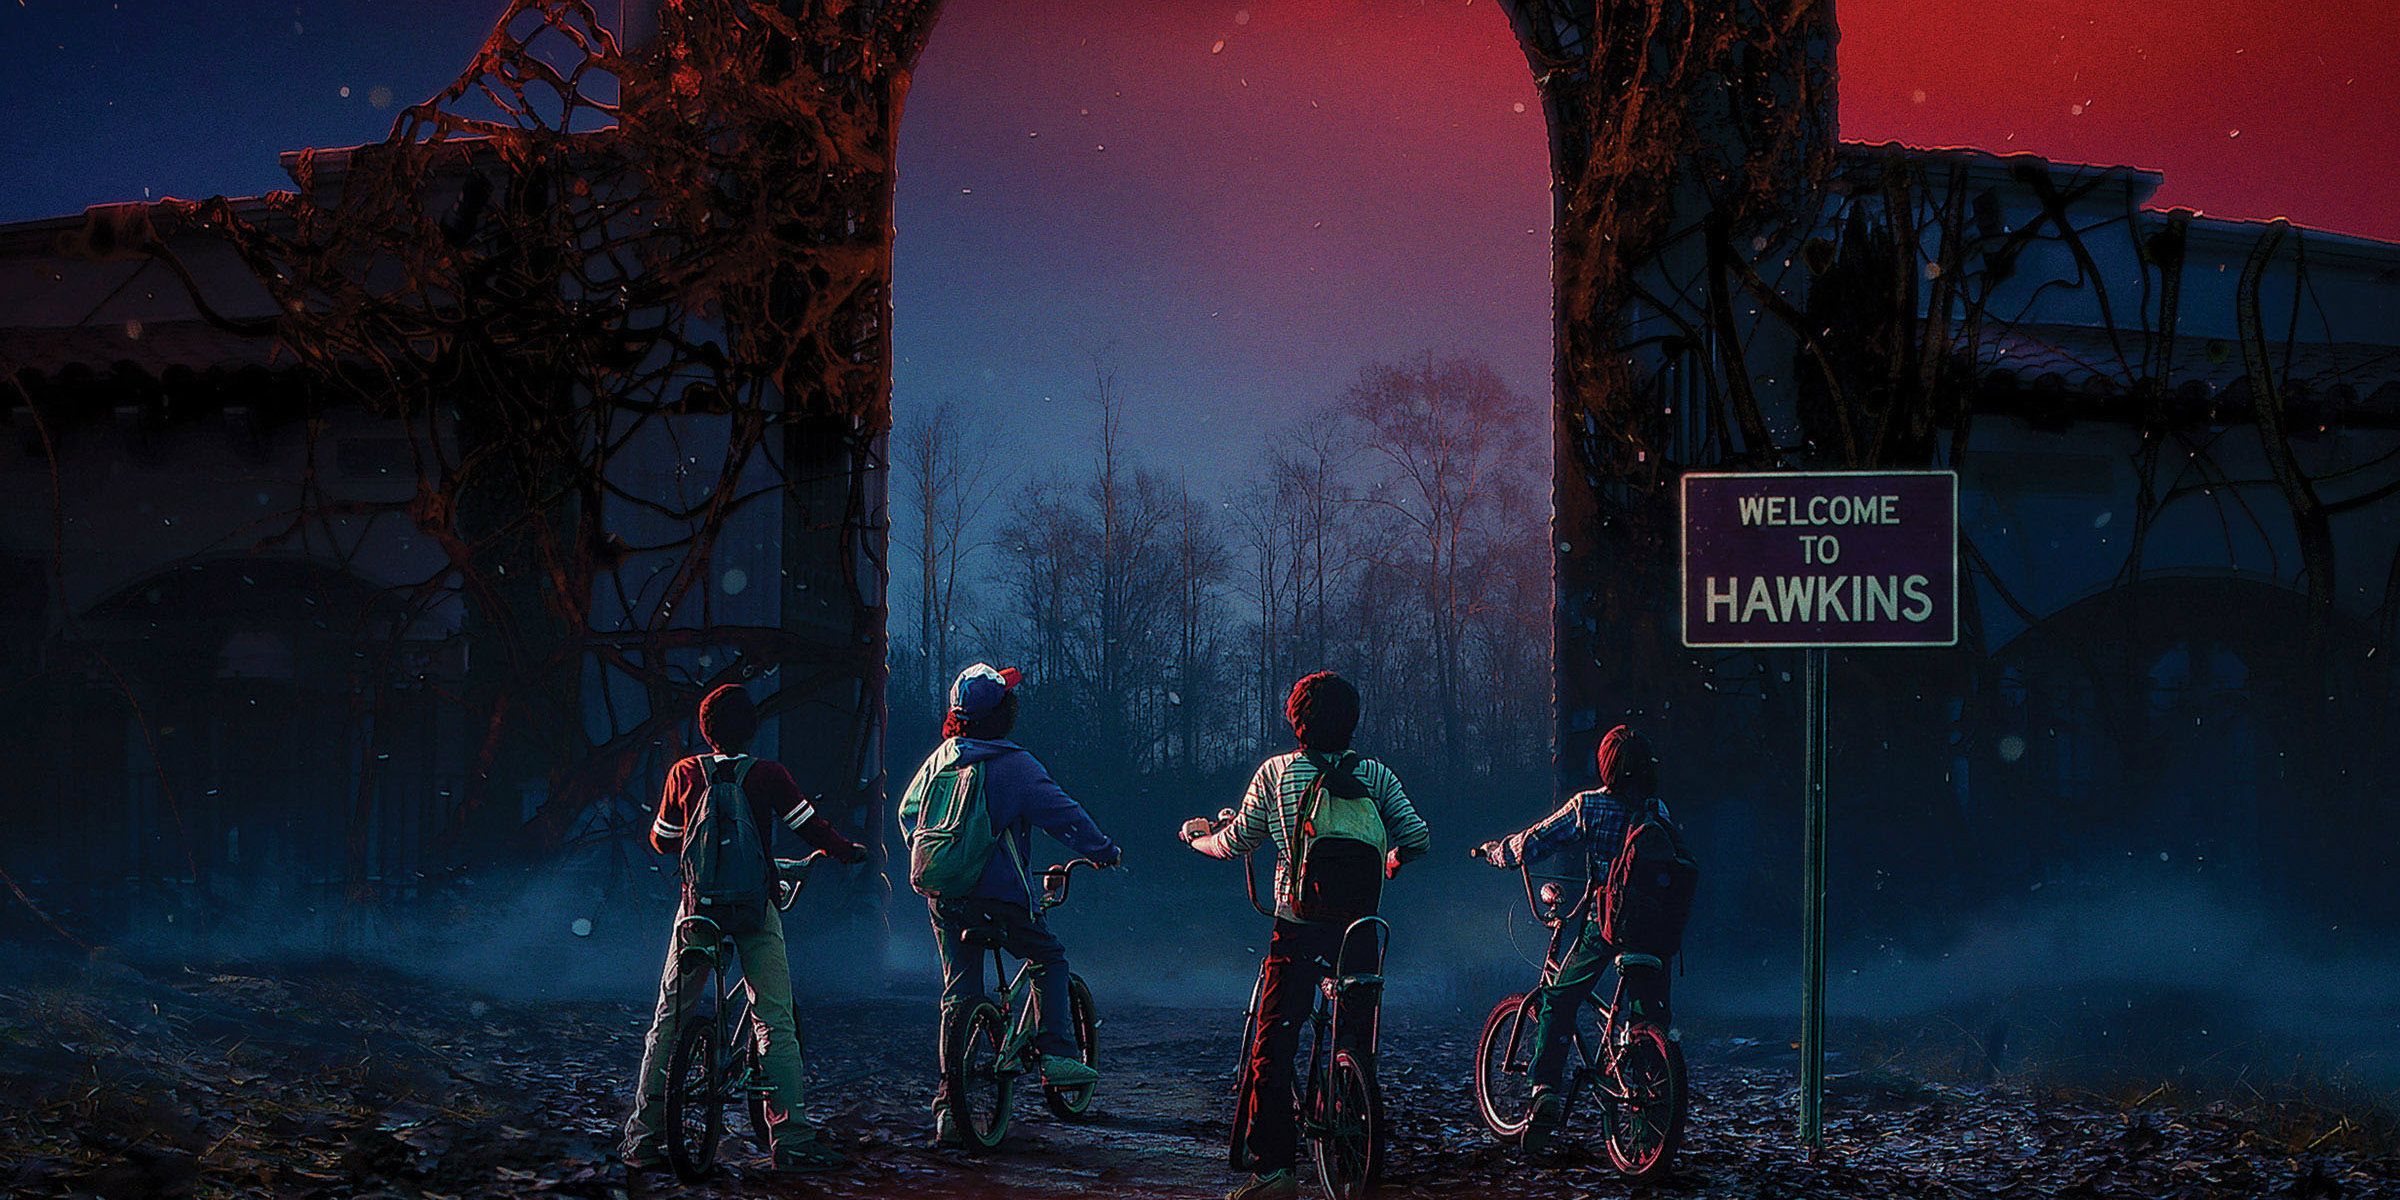 Stranger Things Caused Eggo Waffle Sales to Skyrocket (With a Catch)